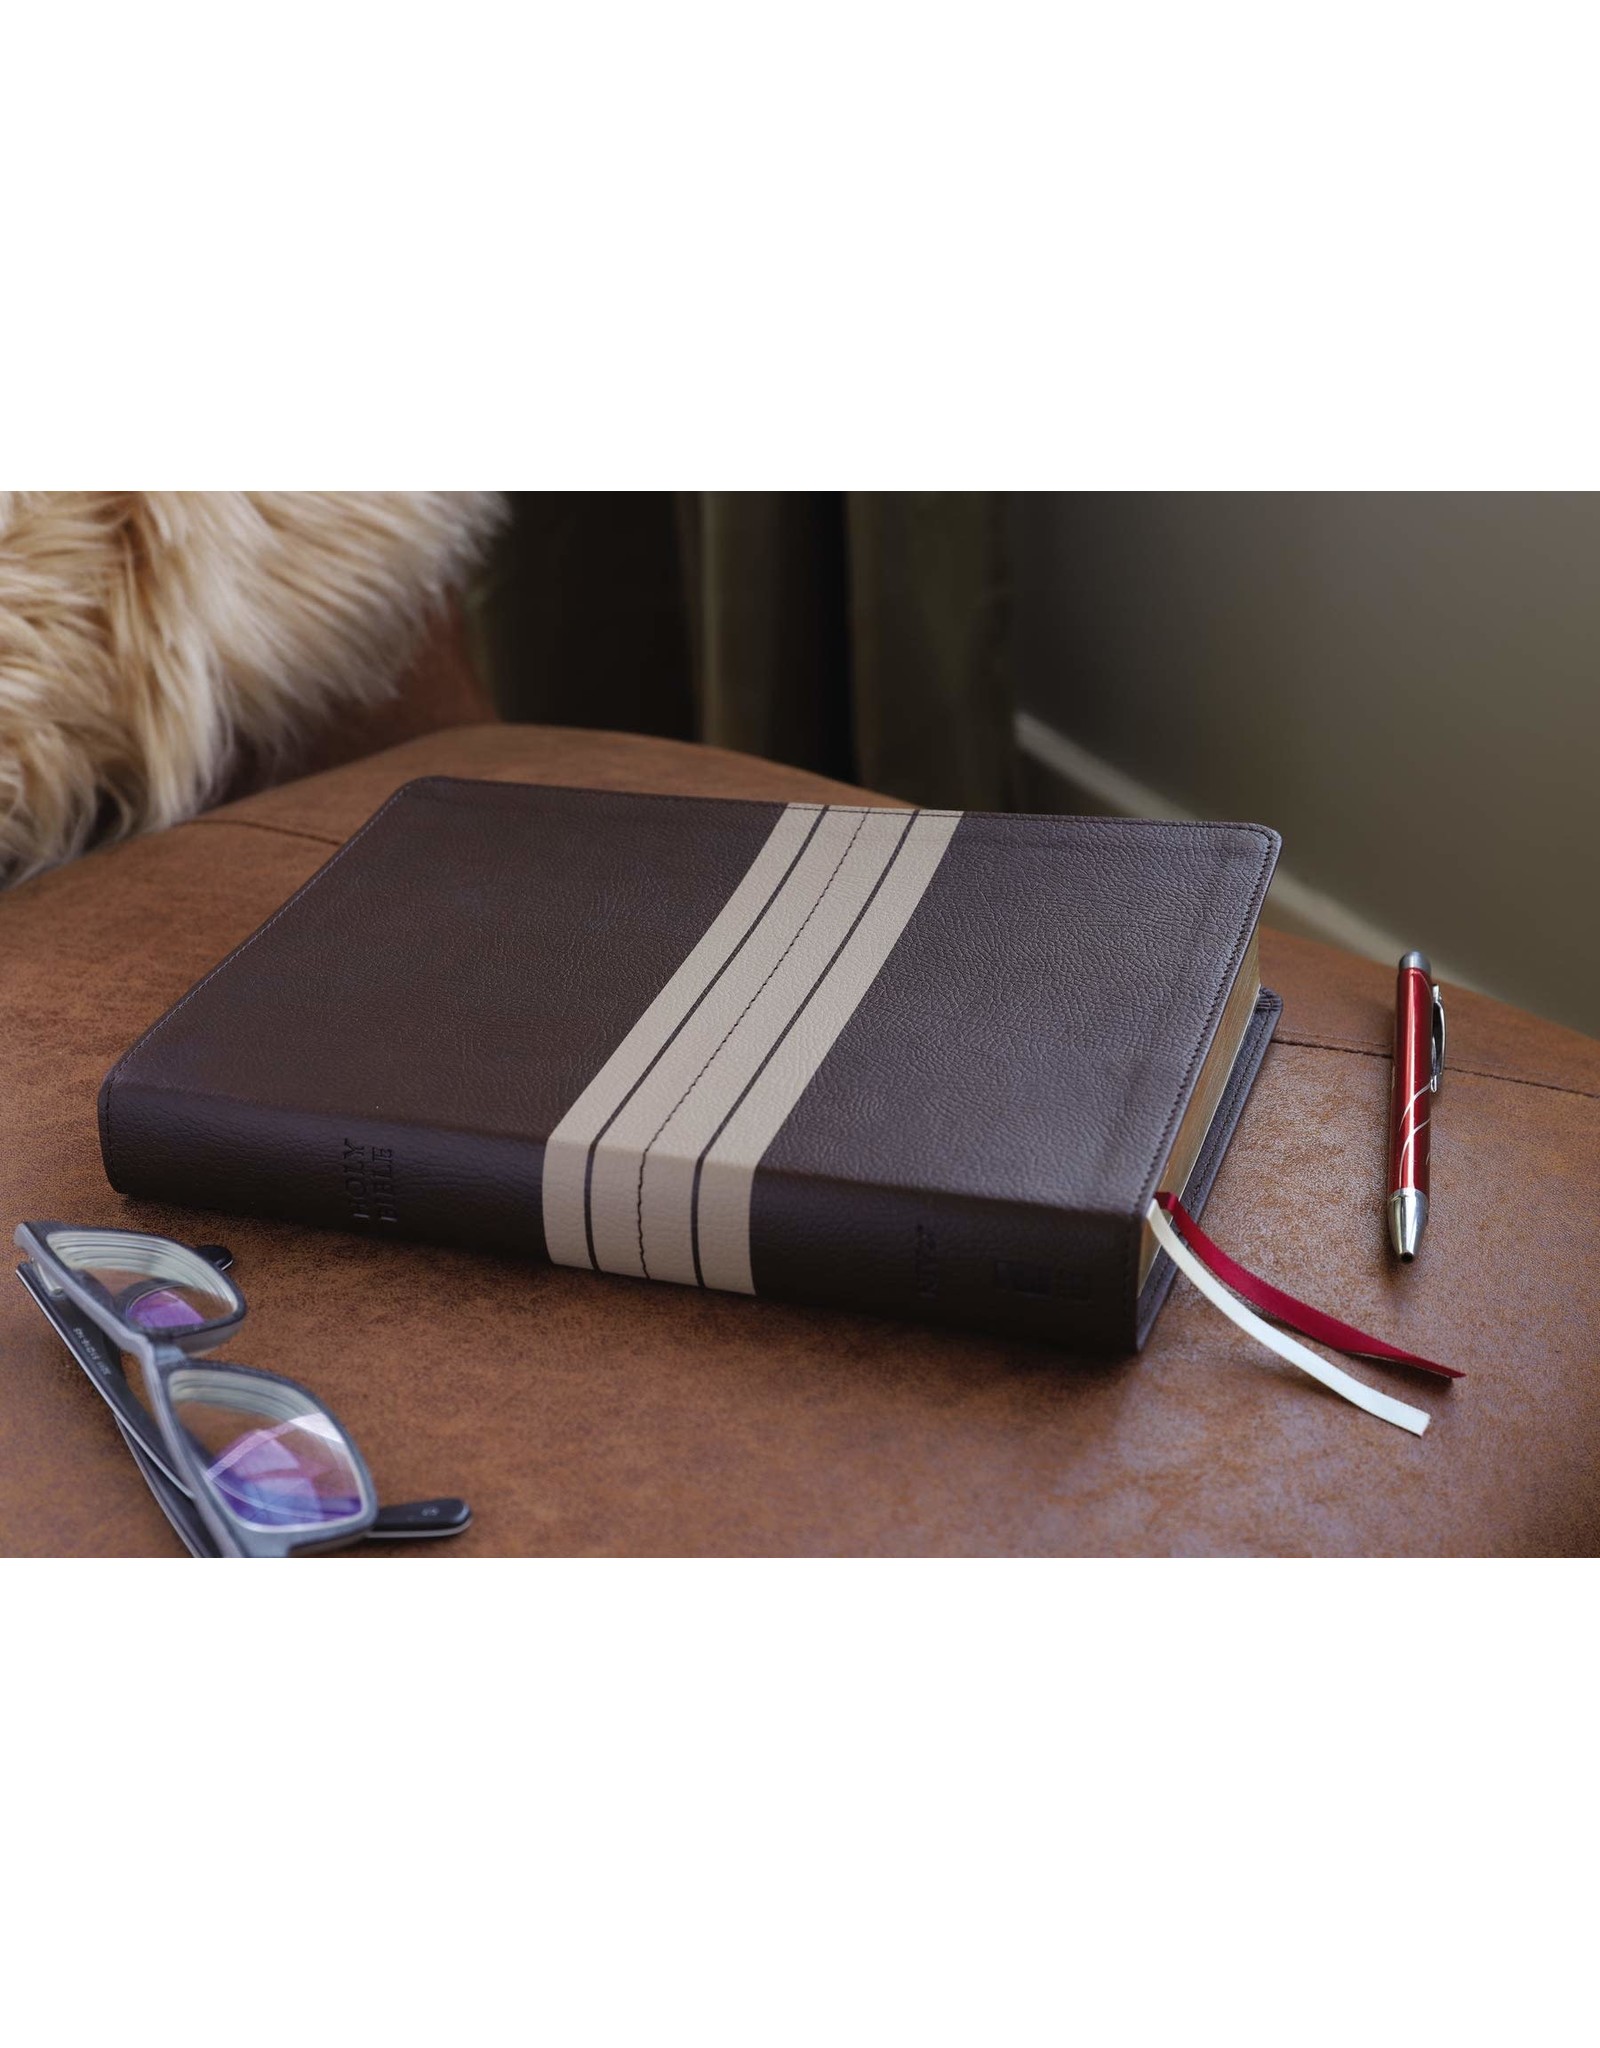 Zondervan NIV Thinline Bible, Giant Print, Imitation Leather, Brown/Tan, Red Letter Edition